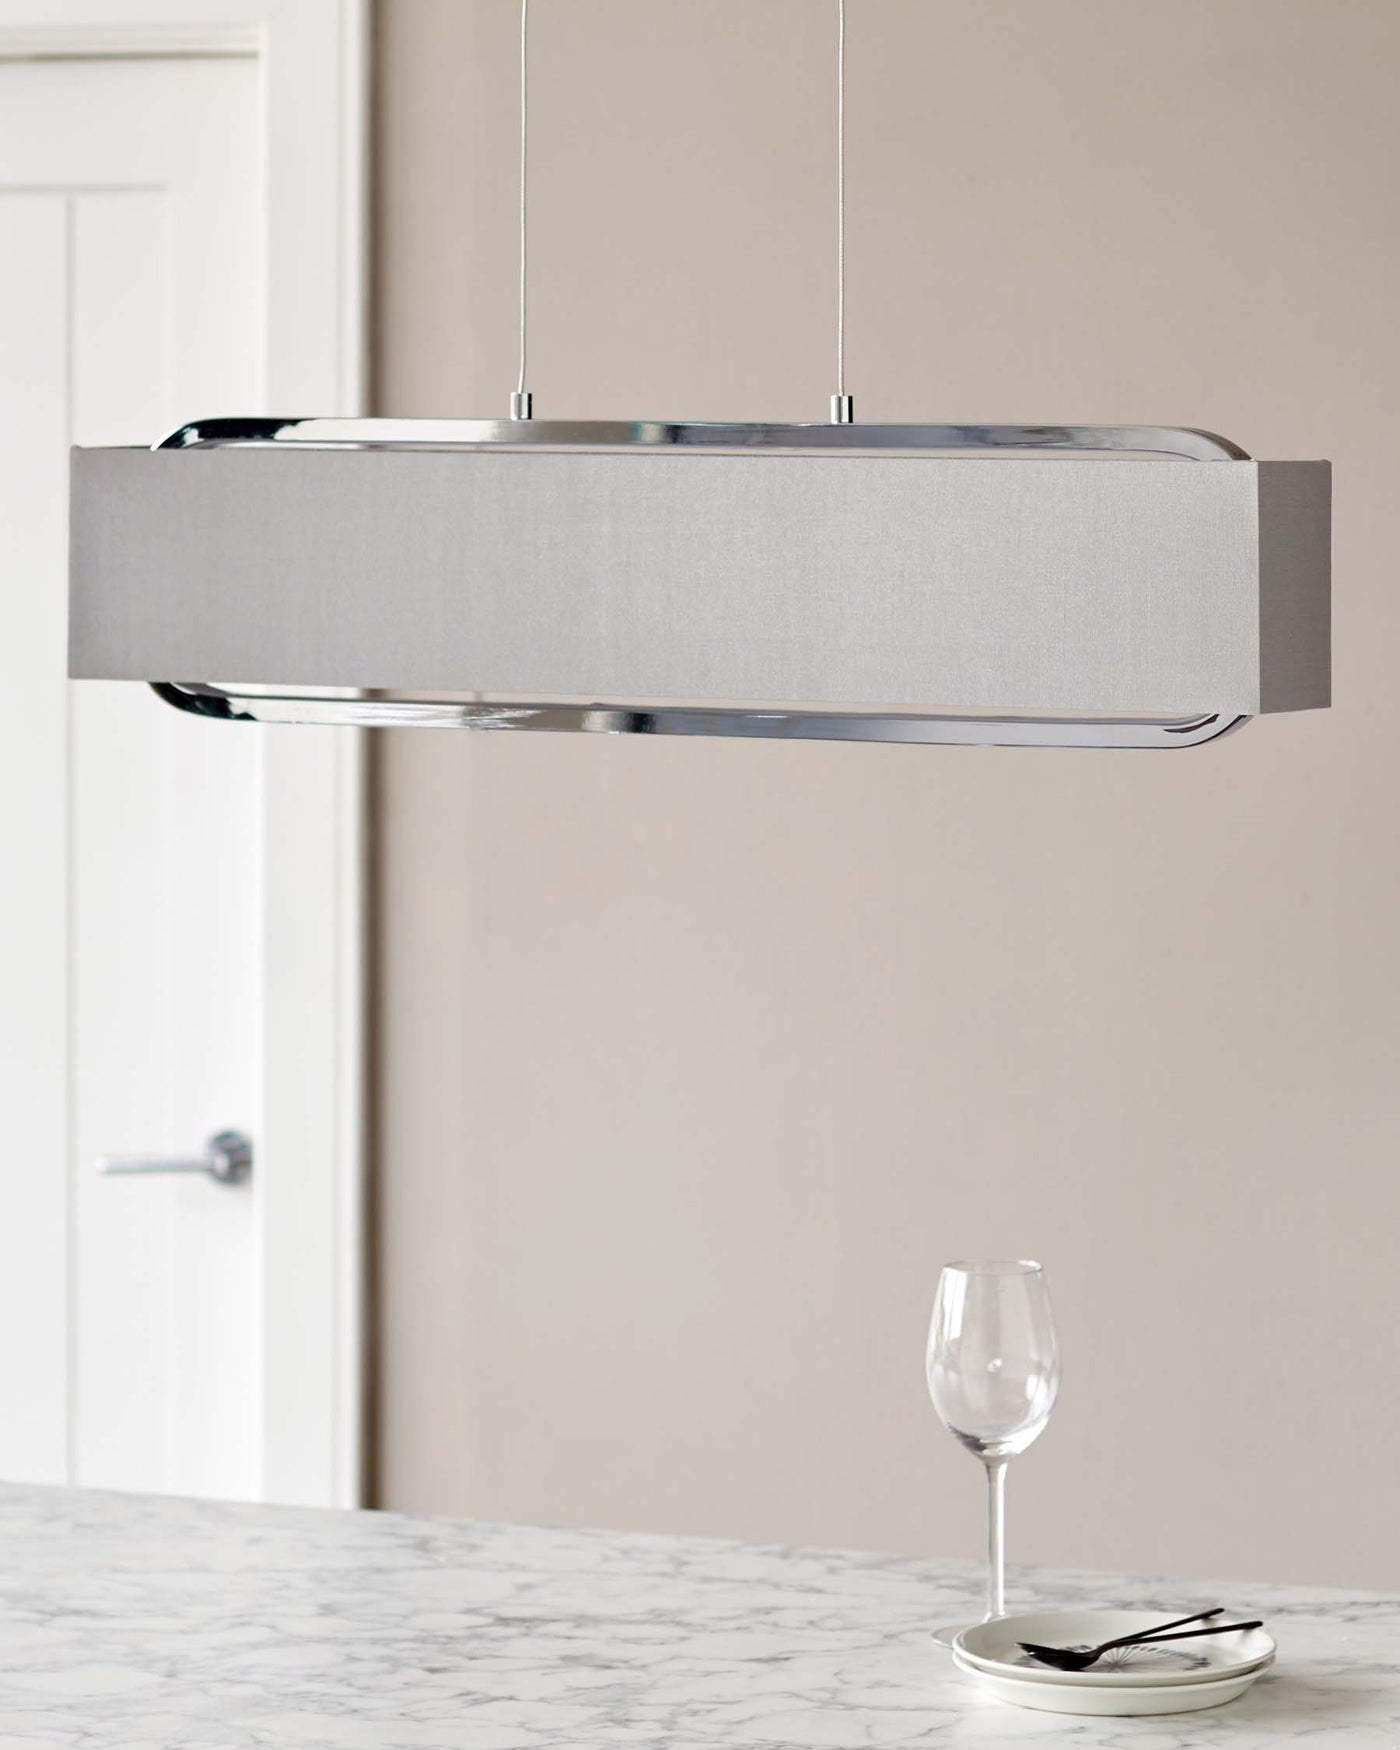 Elegant, contemporary pendant light with a sleek metallic and fabric finish, suspended above a white marble countertop with a wine glass and silverware set on a small plate, adding a touch of sophistication to a modern interior design.